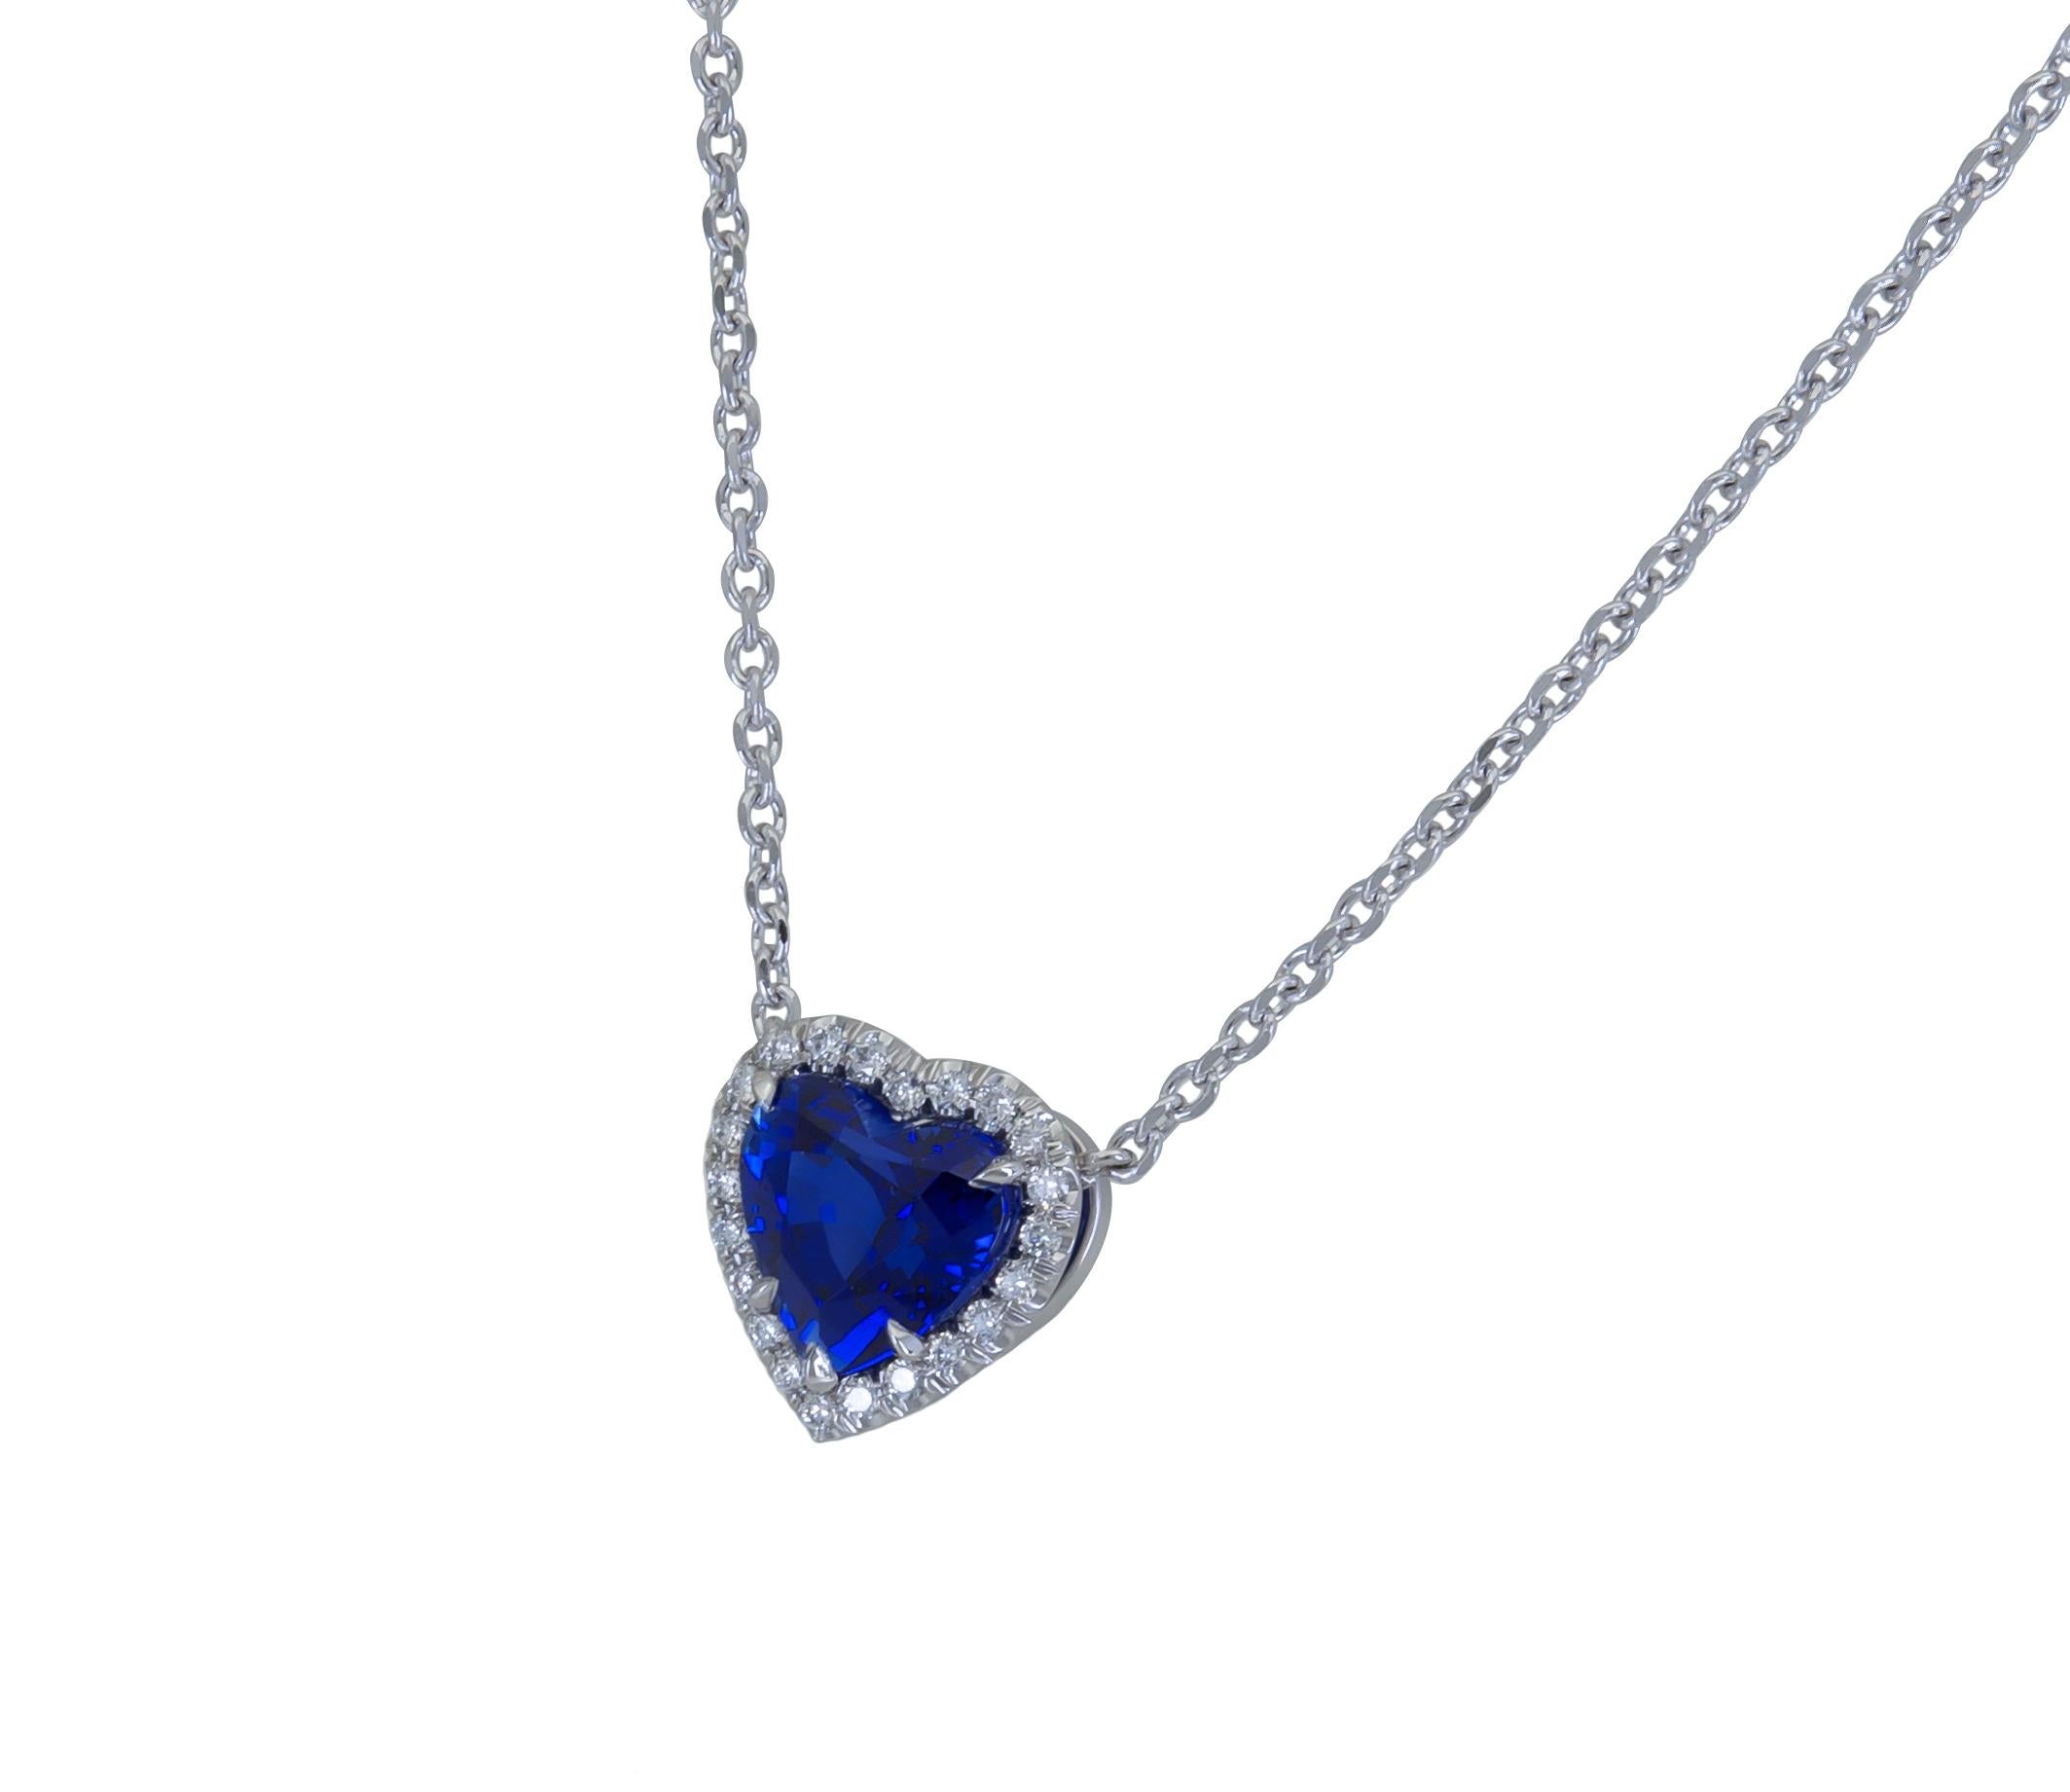 A fashionable piece of jewelry showcasing a vibrant and rich blue sapphire in a heart shape, surrounded by a single row of round brilliant diamonds. Made in platinum.
Blue Sapphire weighs 2.77 carats and is certified by C.Dunaigre as vivid blue